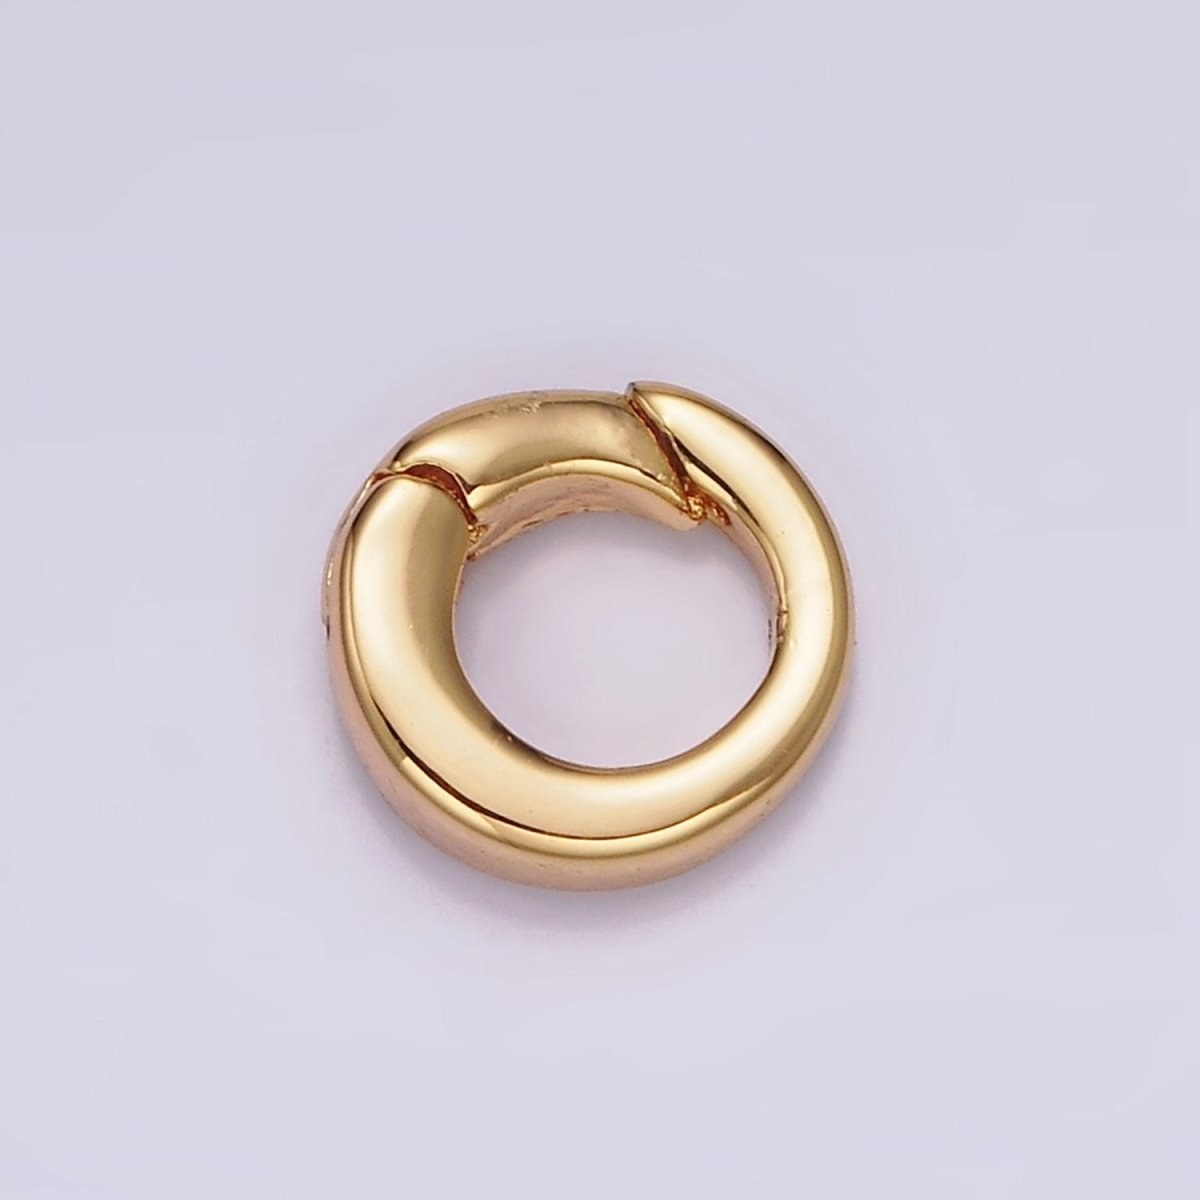 18K Gold Filled Push Gate Ring Charm Holder Bail for Charm Jewelry Kit Supplies For DIY Jewelry Making | Z-492 - Z-497 - DLUXCA